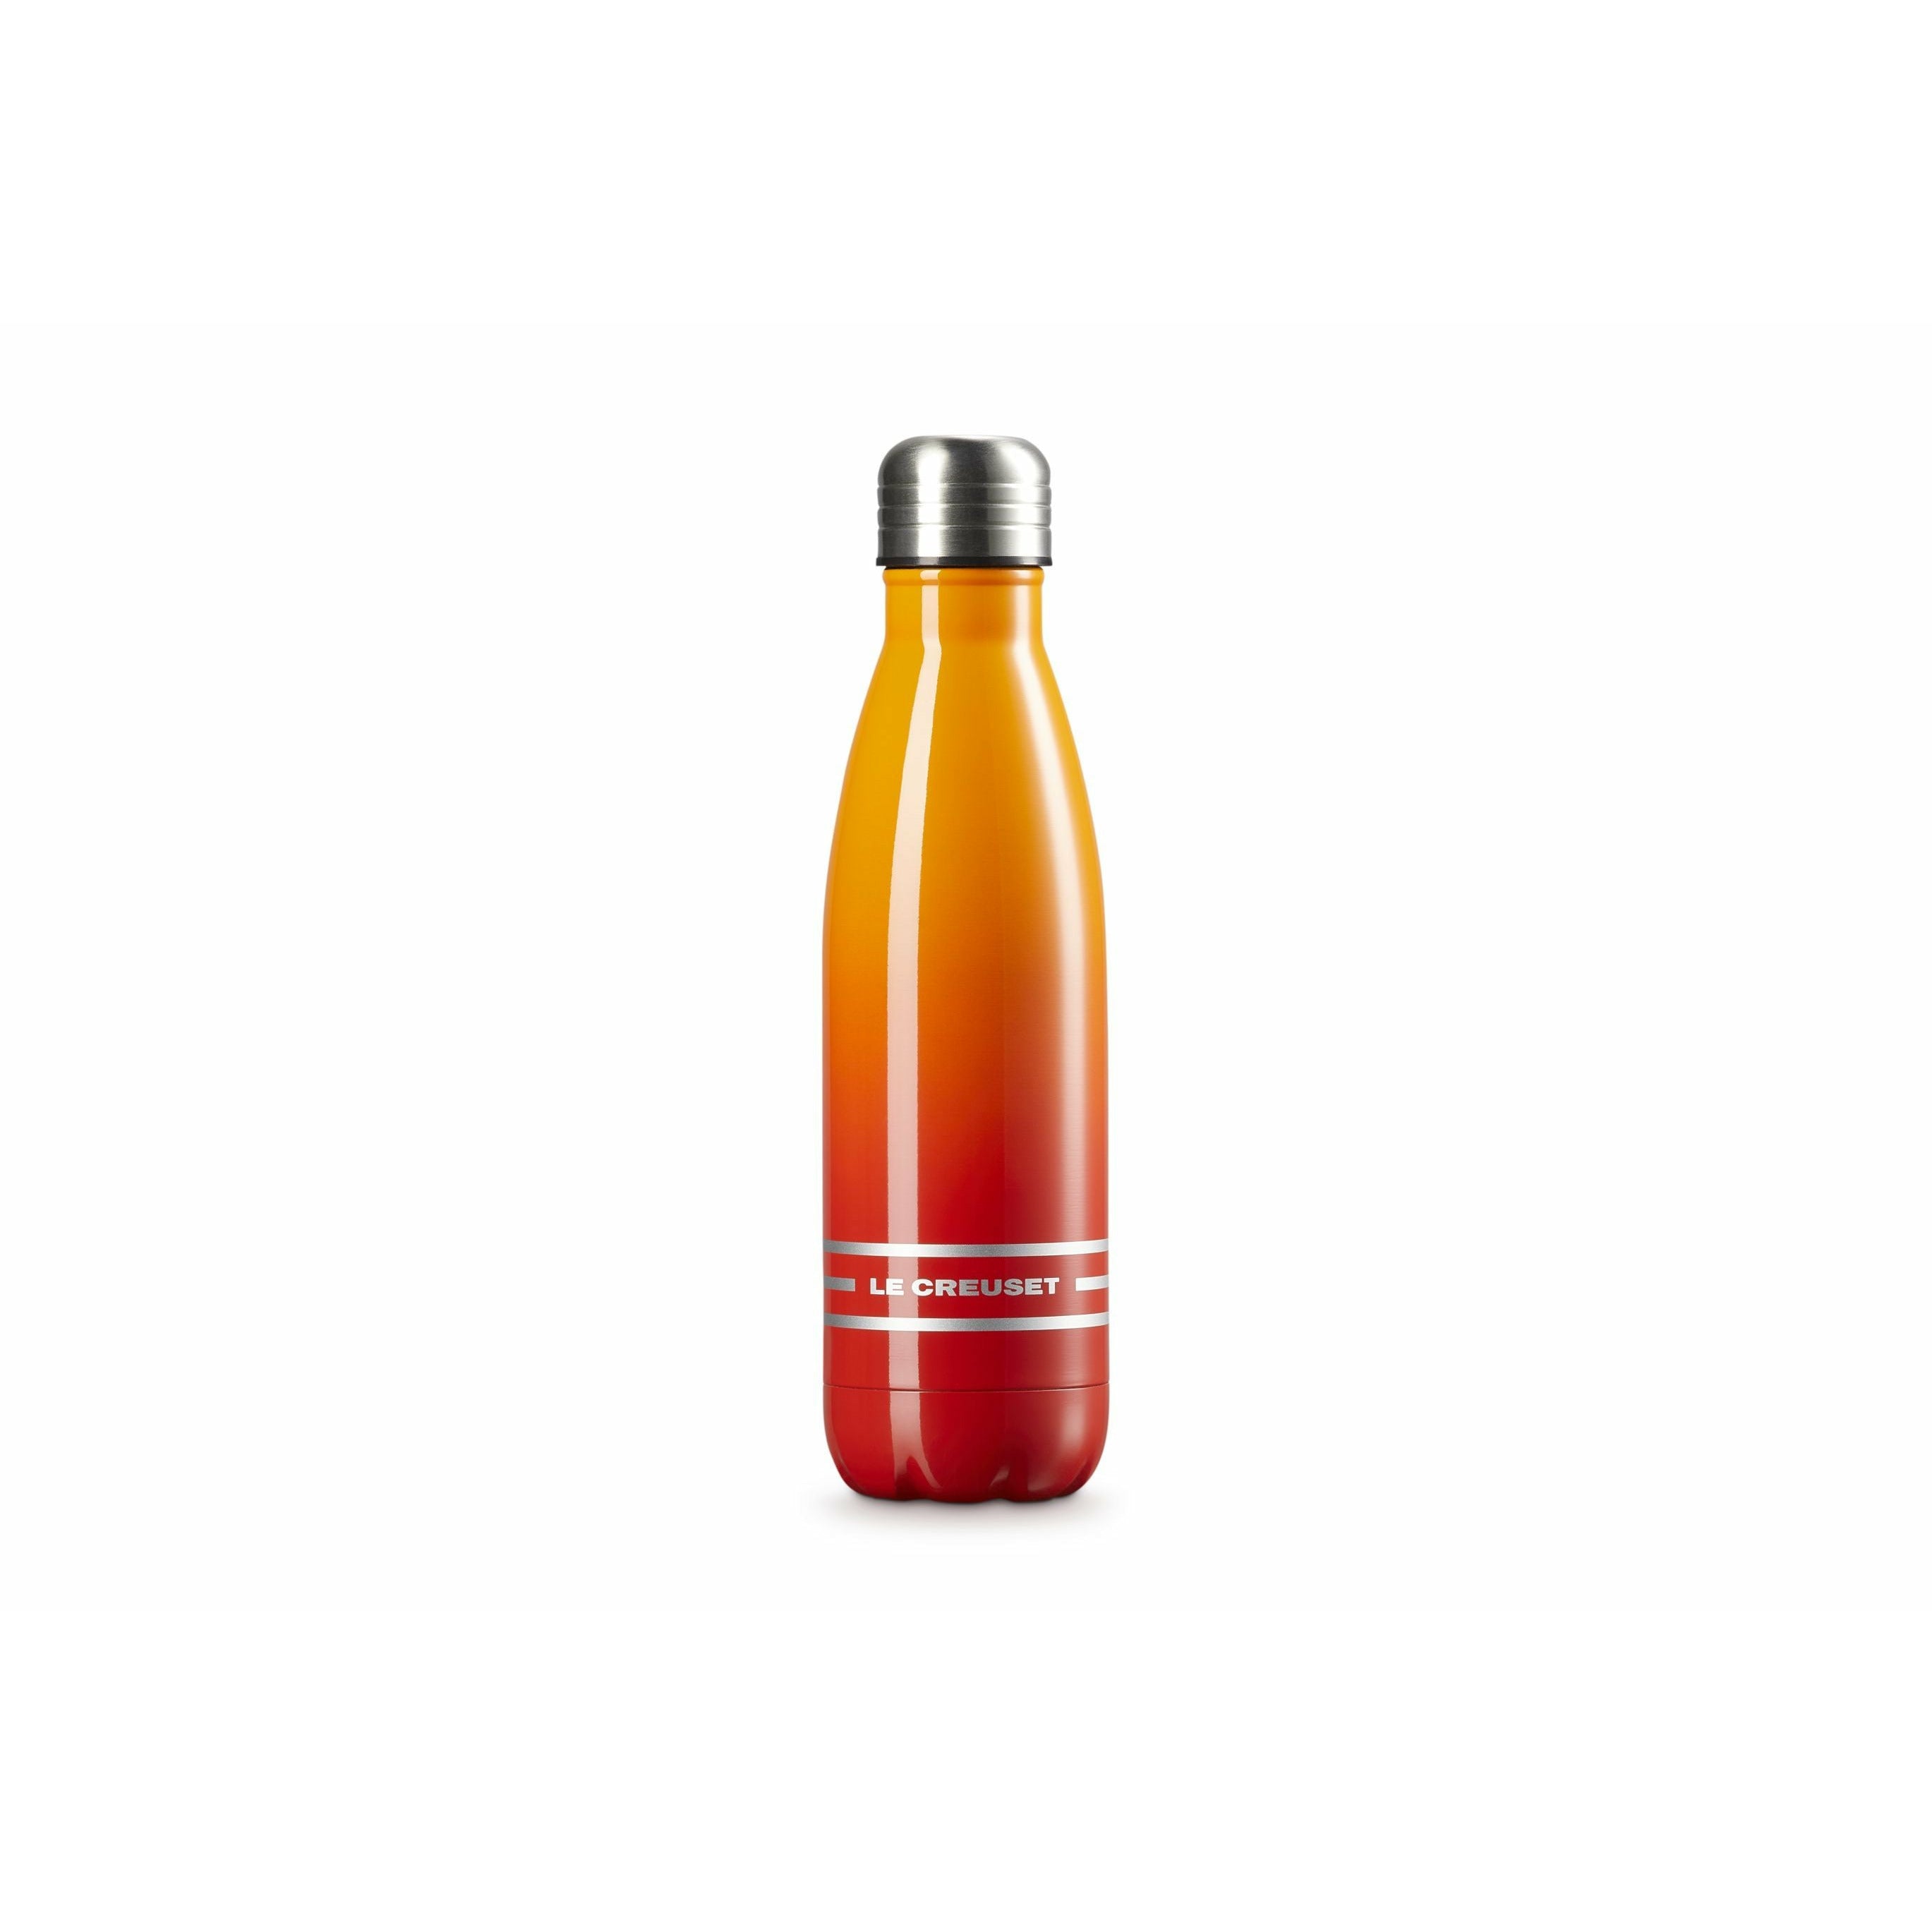 Le Creuset Trinkflasche 500 Ml, Ofenrot